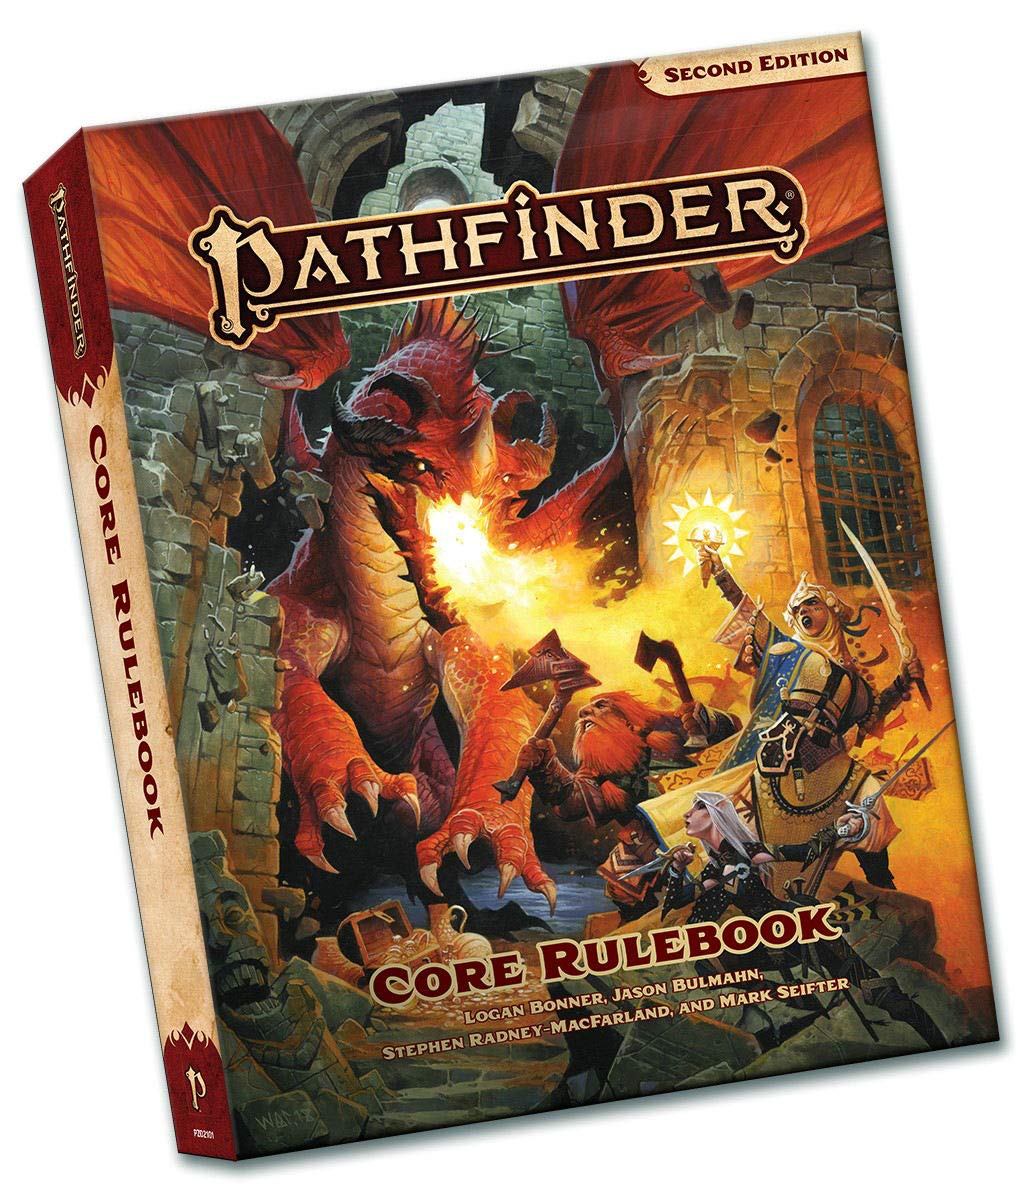 PATHFINDER: POCKET CORE BOOK 2ND EDITION